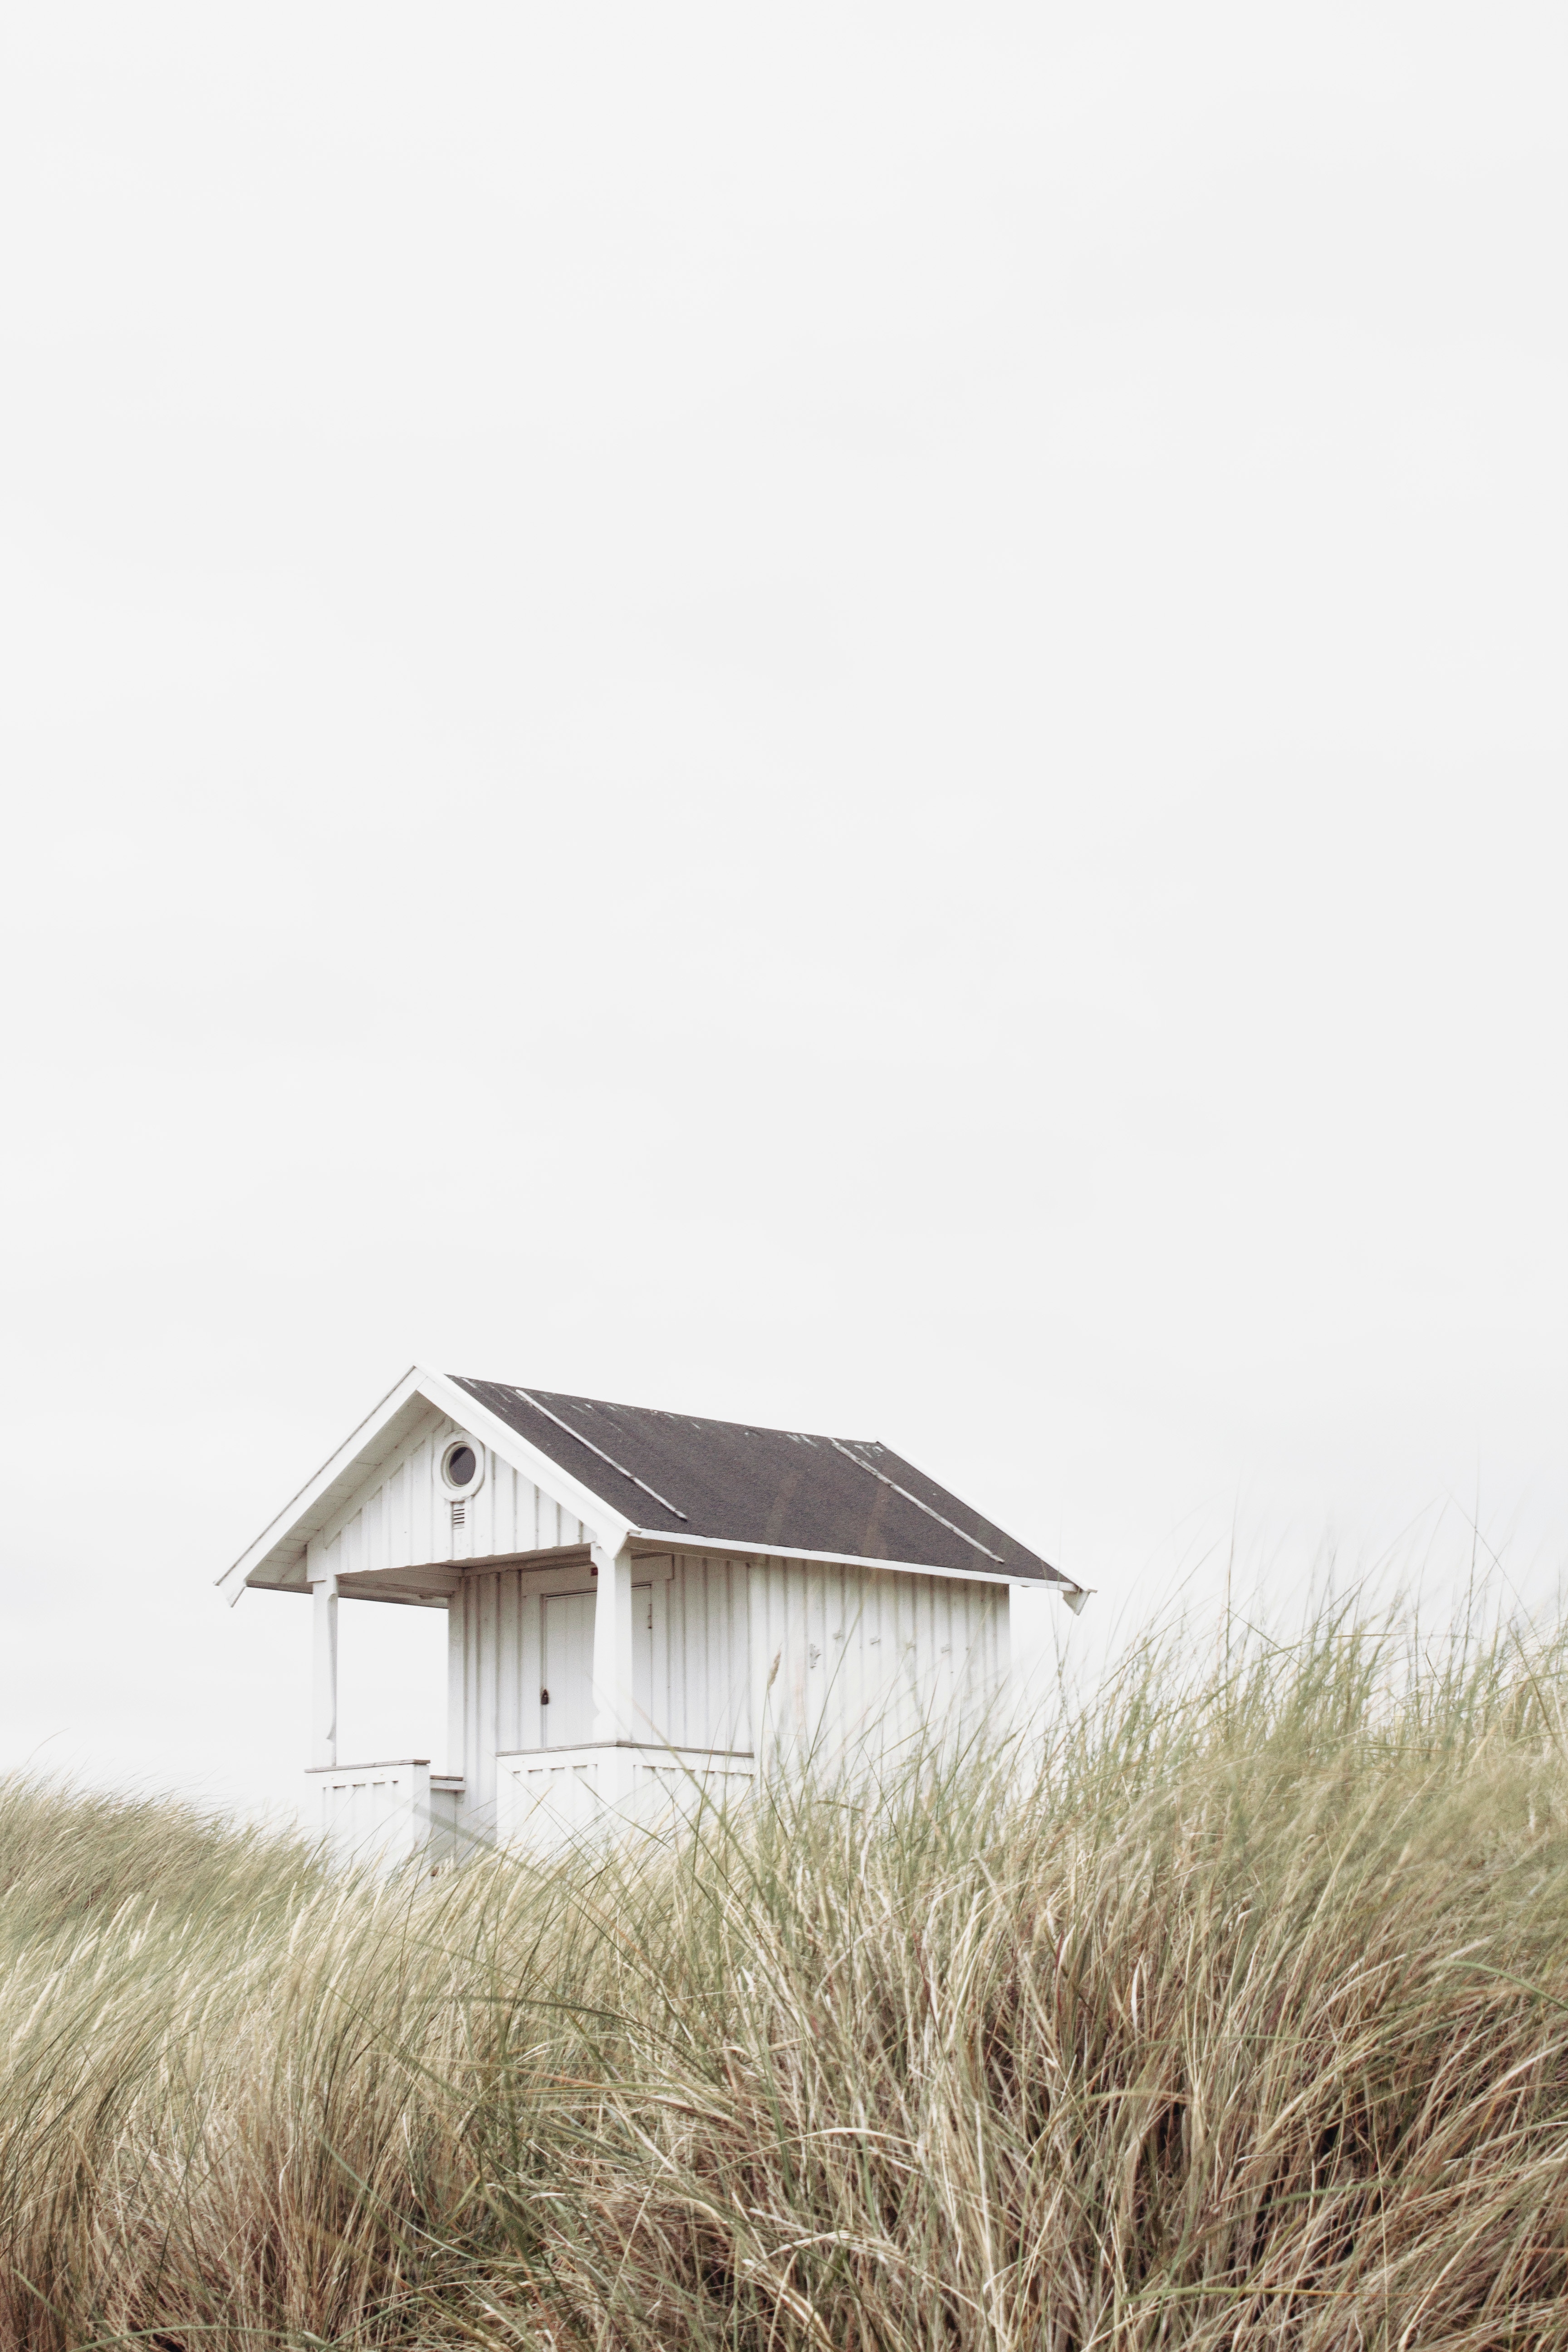 minimalism, alone, lodge, grass, small house, lonely, harmony QHD